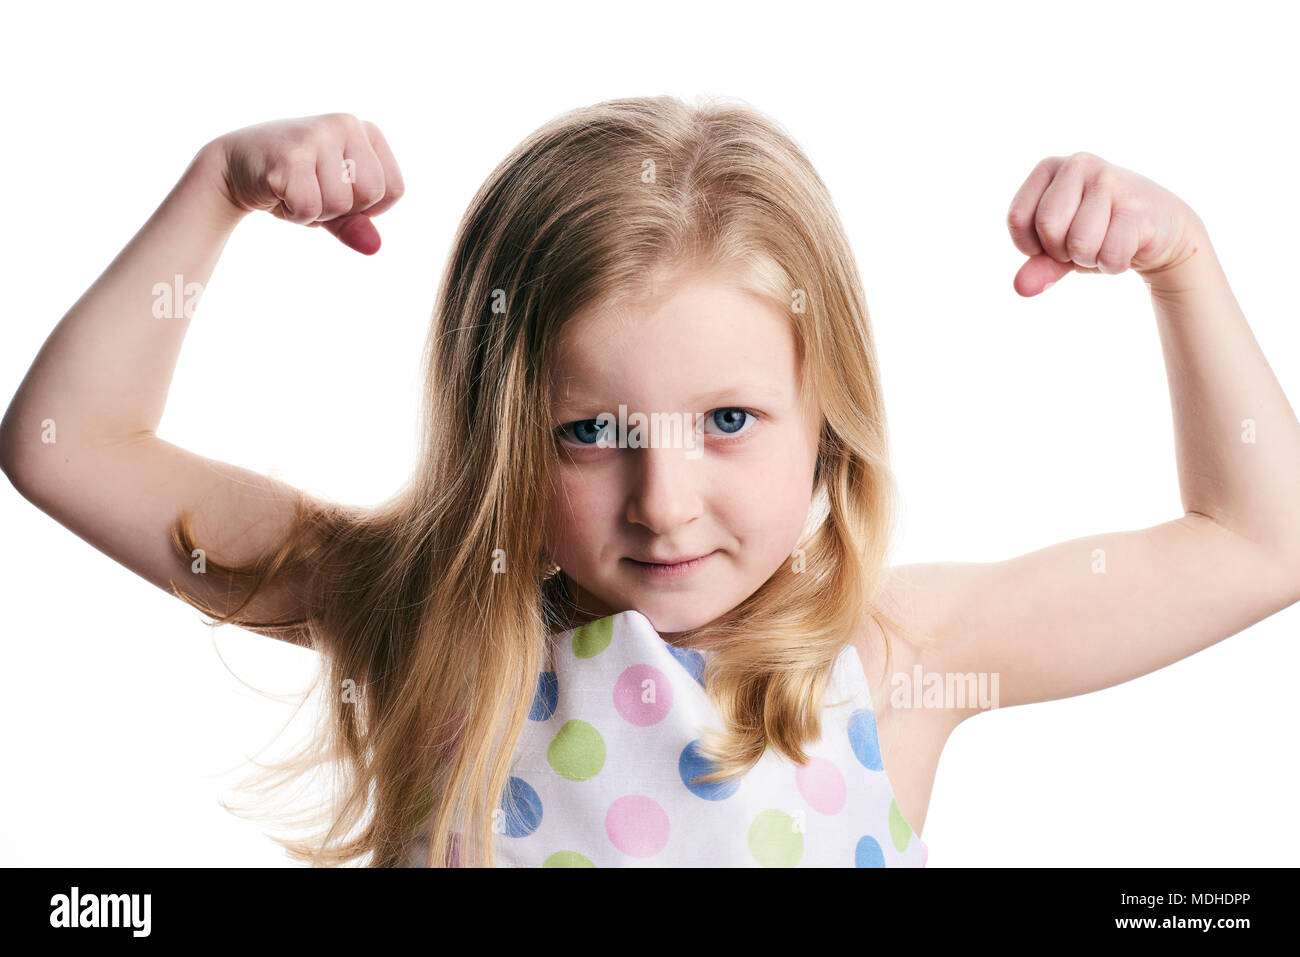 A young girl with blond hair shows her muscles on a white background Stock Photo